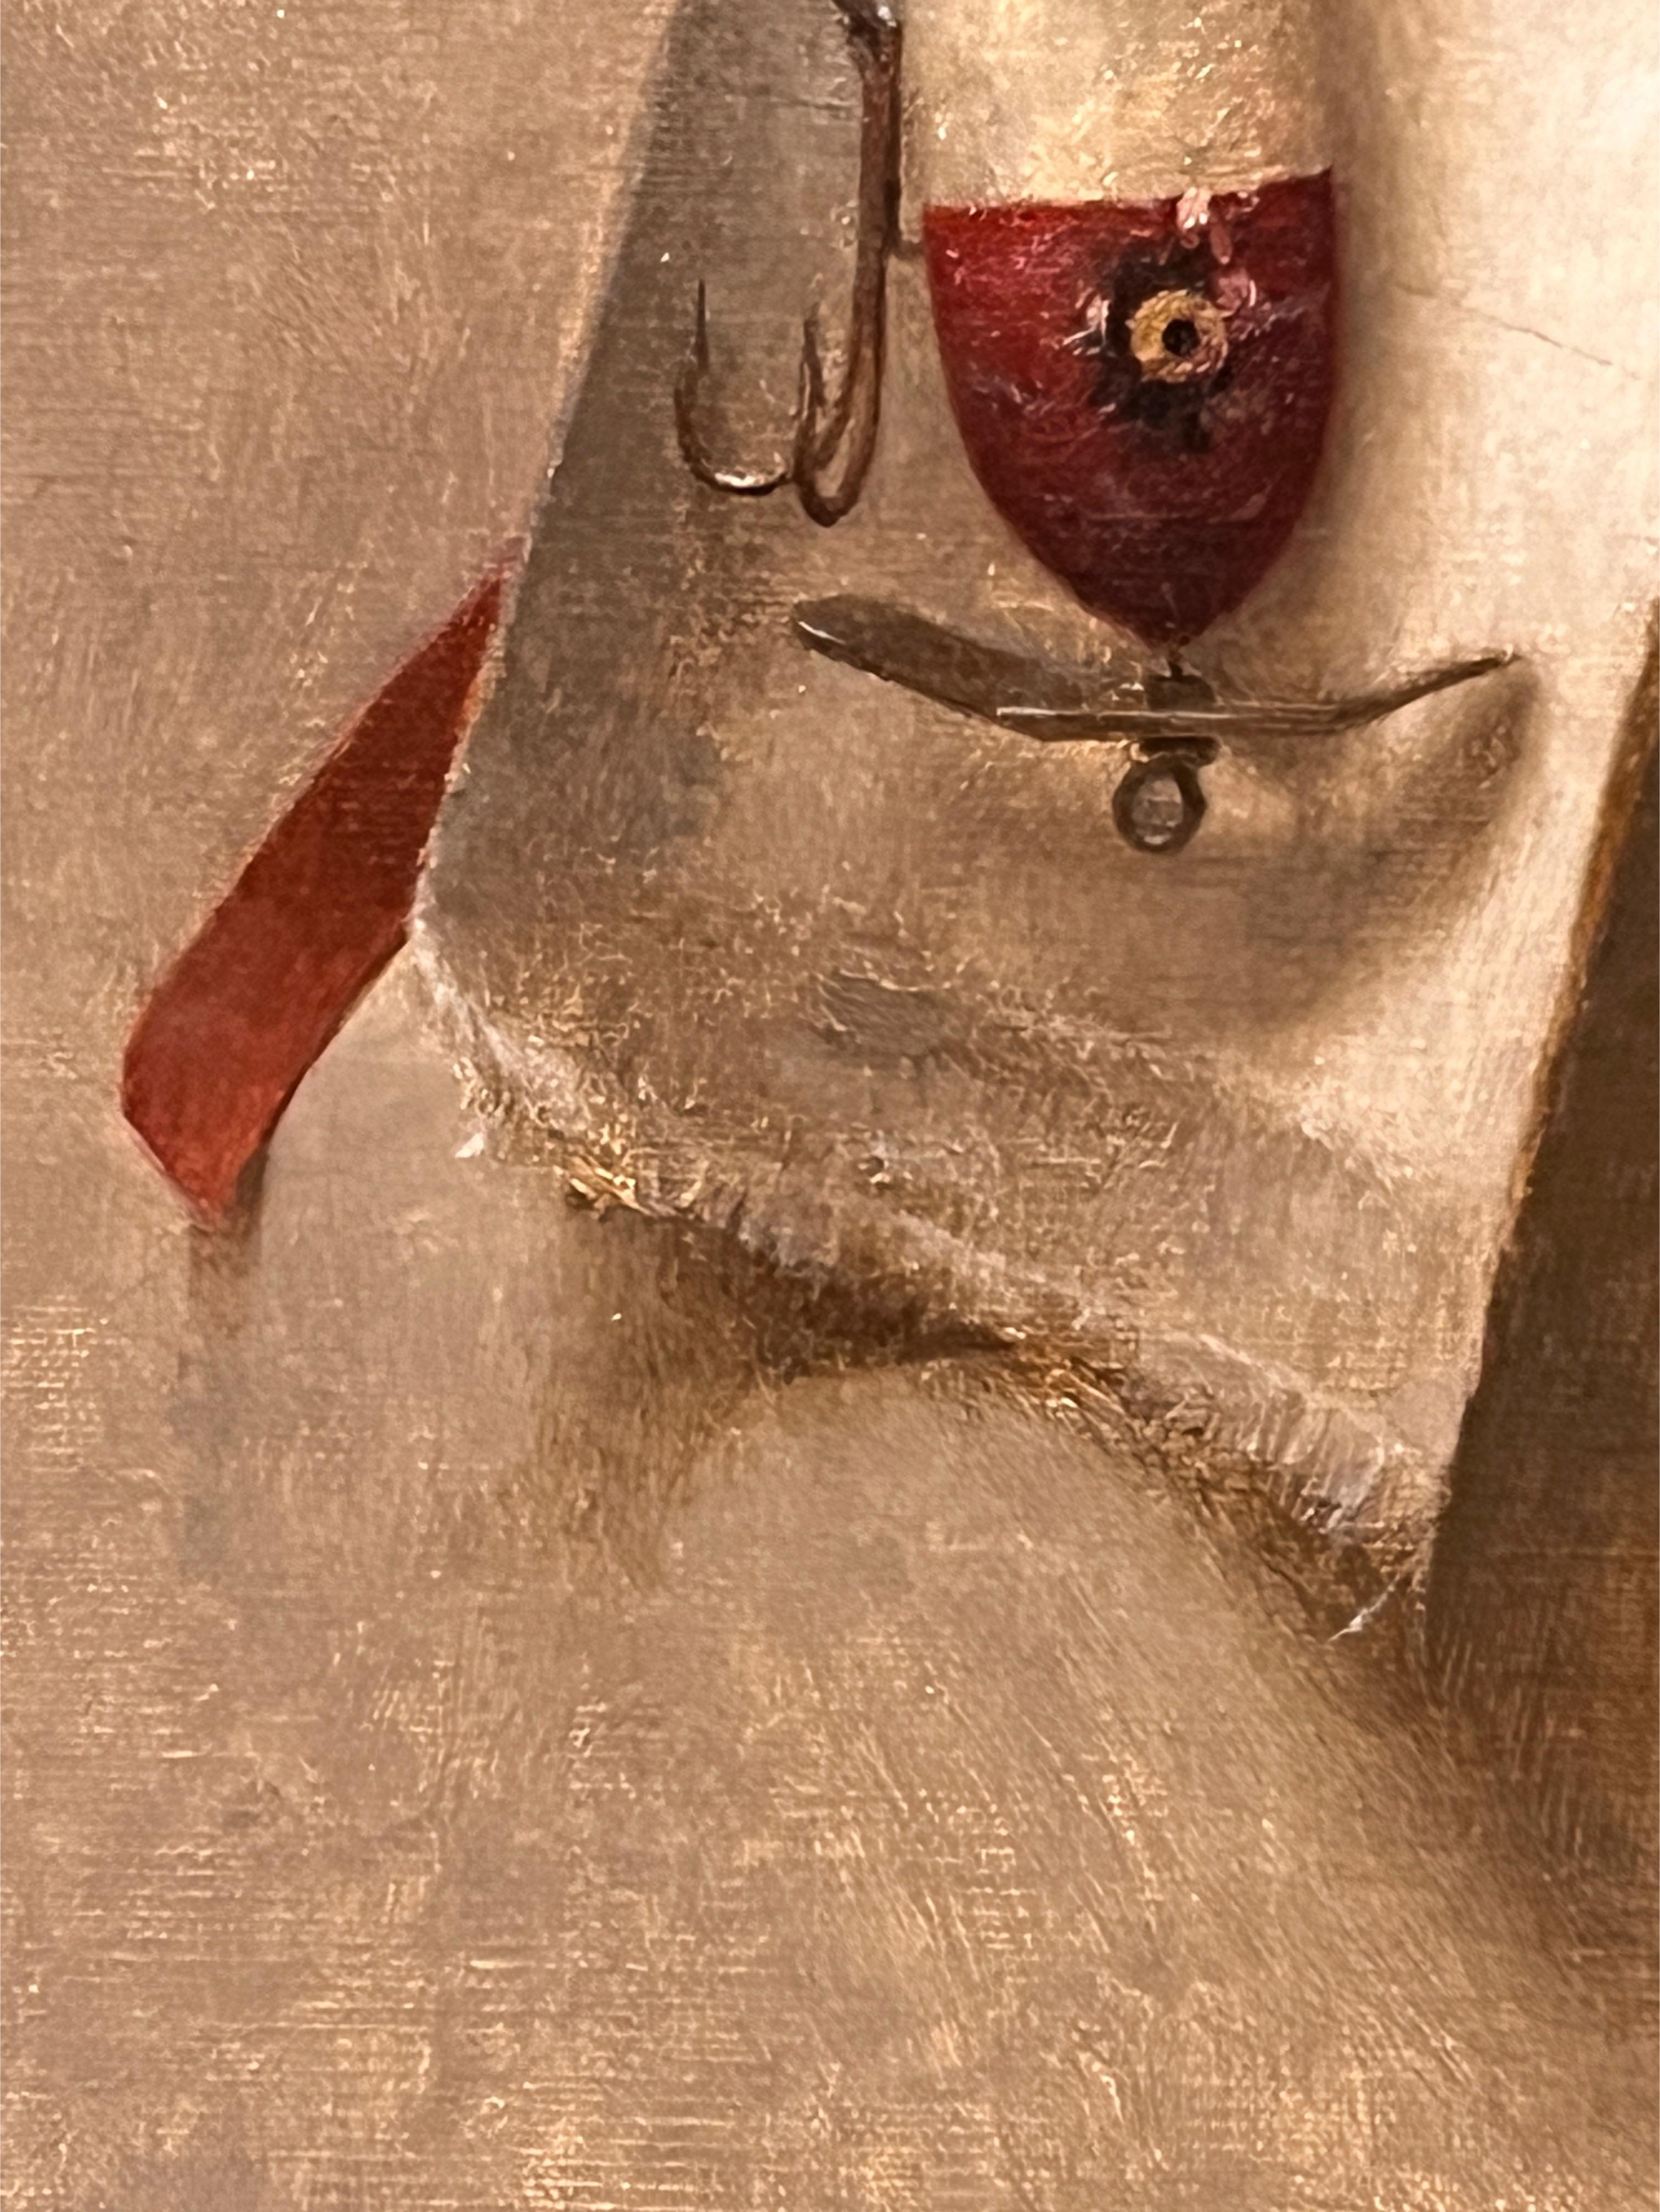 An original oil painting on linen panel of an antique fishing lure, framed in a hand-made frame by one of New York's finest frame makers.

Master Still Life painter Dale Zinkowski was born in New York and his earliest memories of painting and